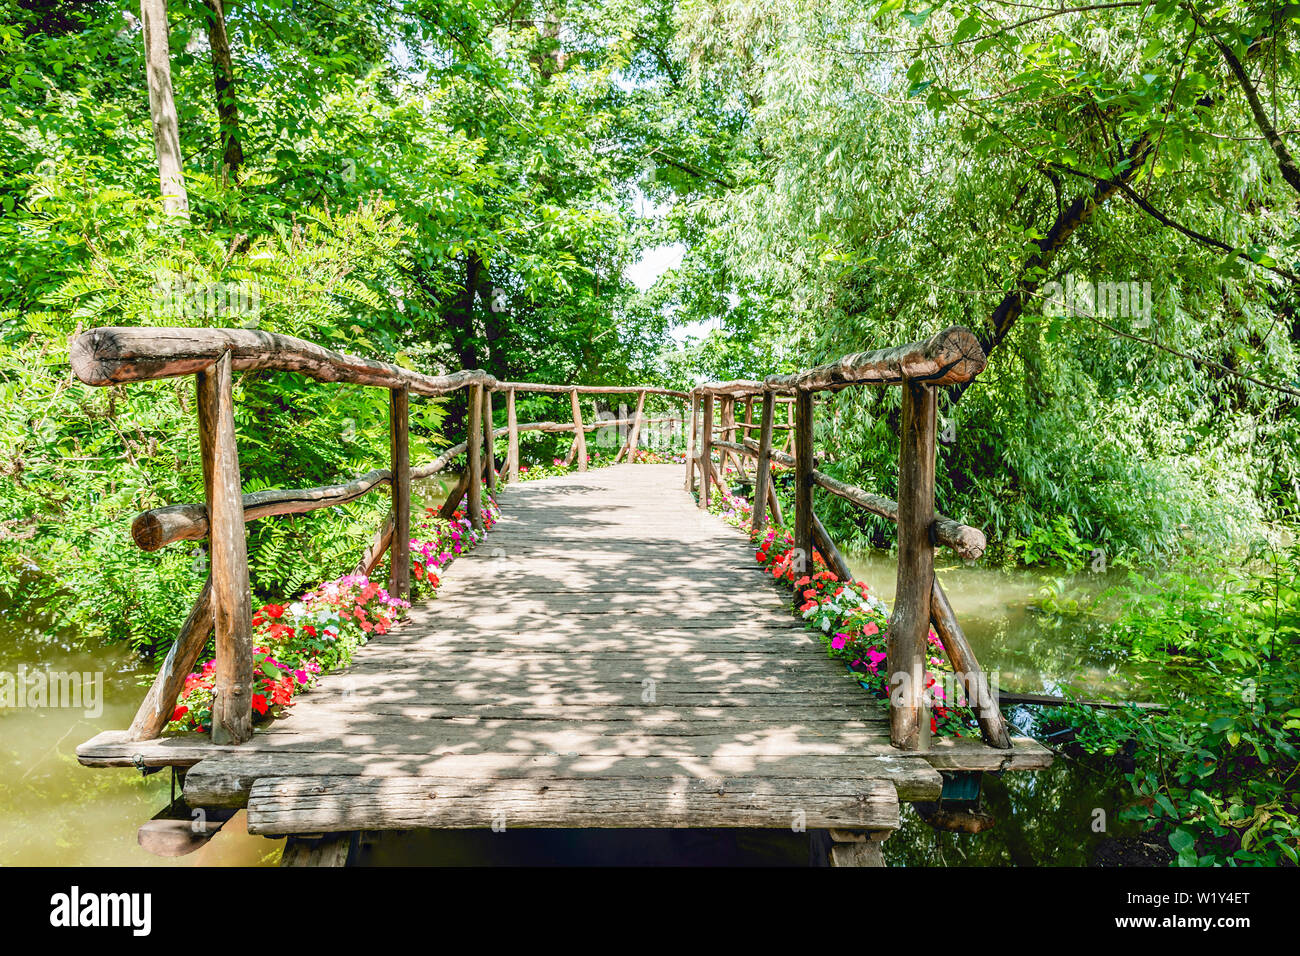 Hand made small romantic wooden bridge over the river water surrounded by trees and flowers leading to pier among river plants aged weathered wood mad Stock Photo